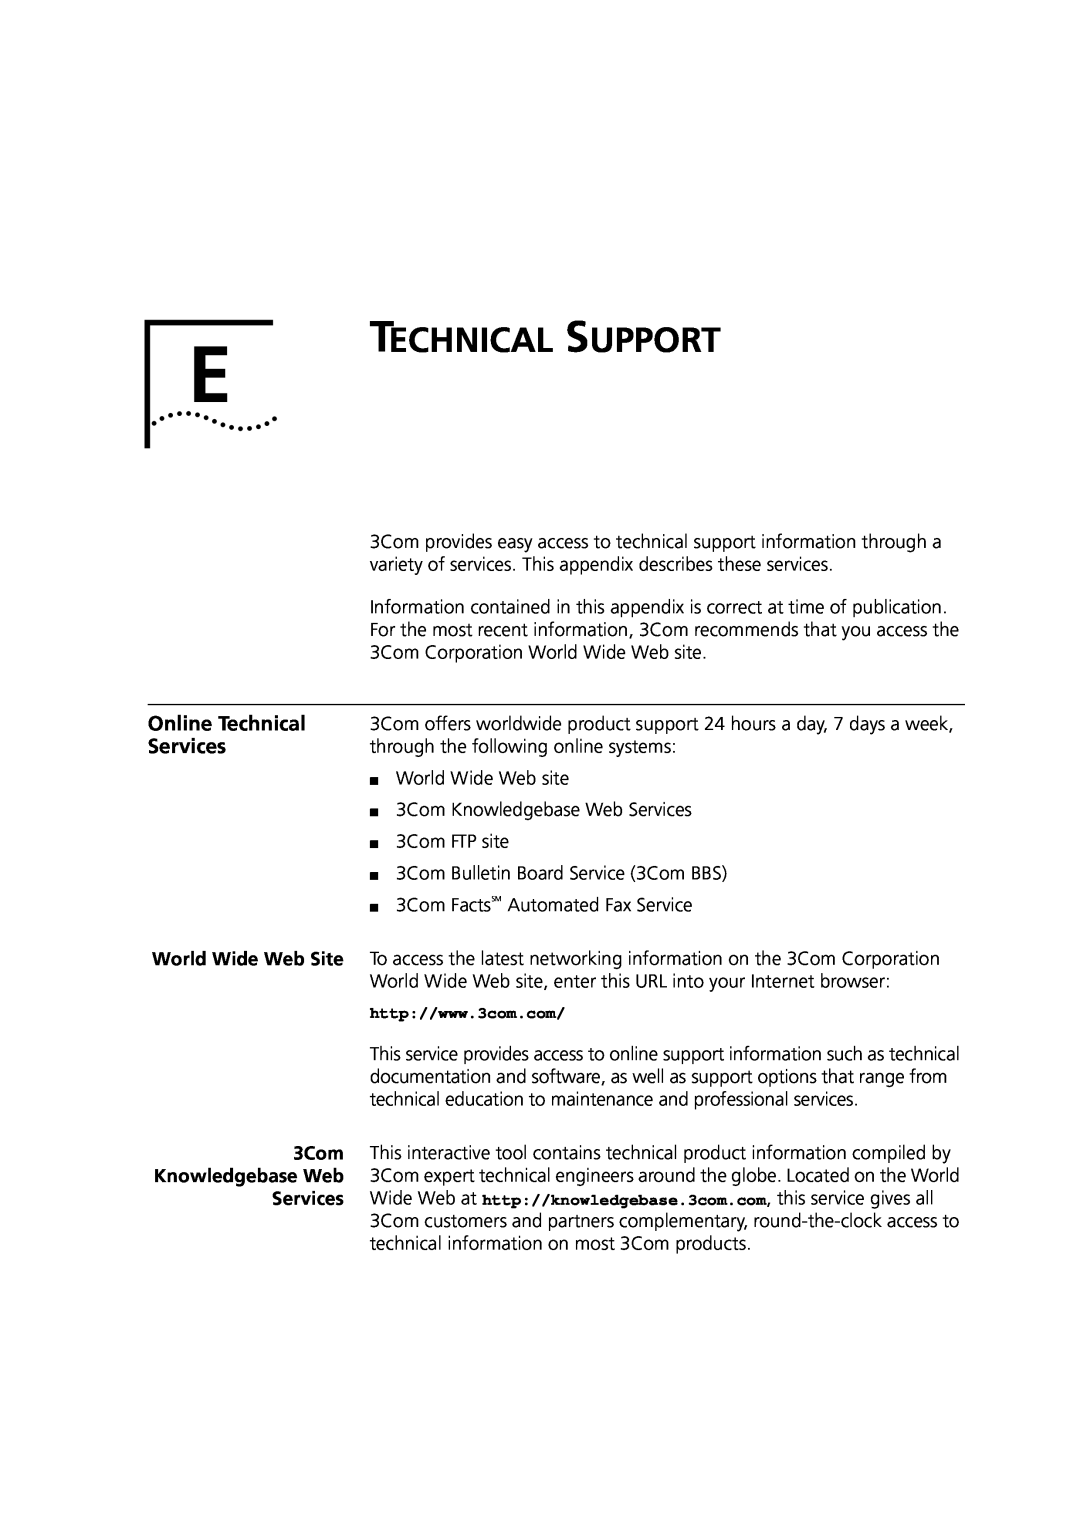 3Com 7000 manual Technical Support, Online Technical, Services, 3Com 